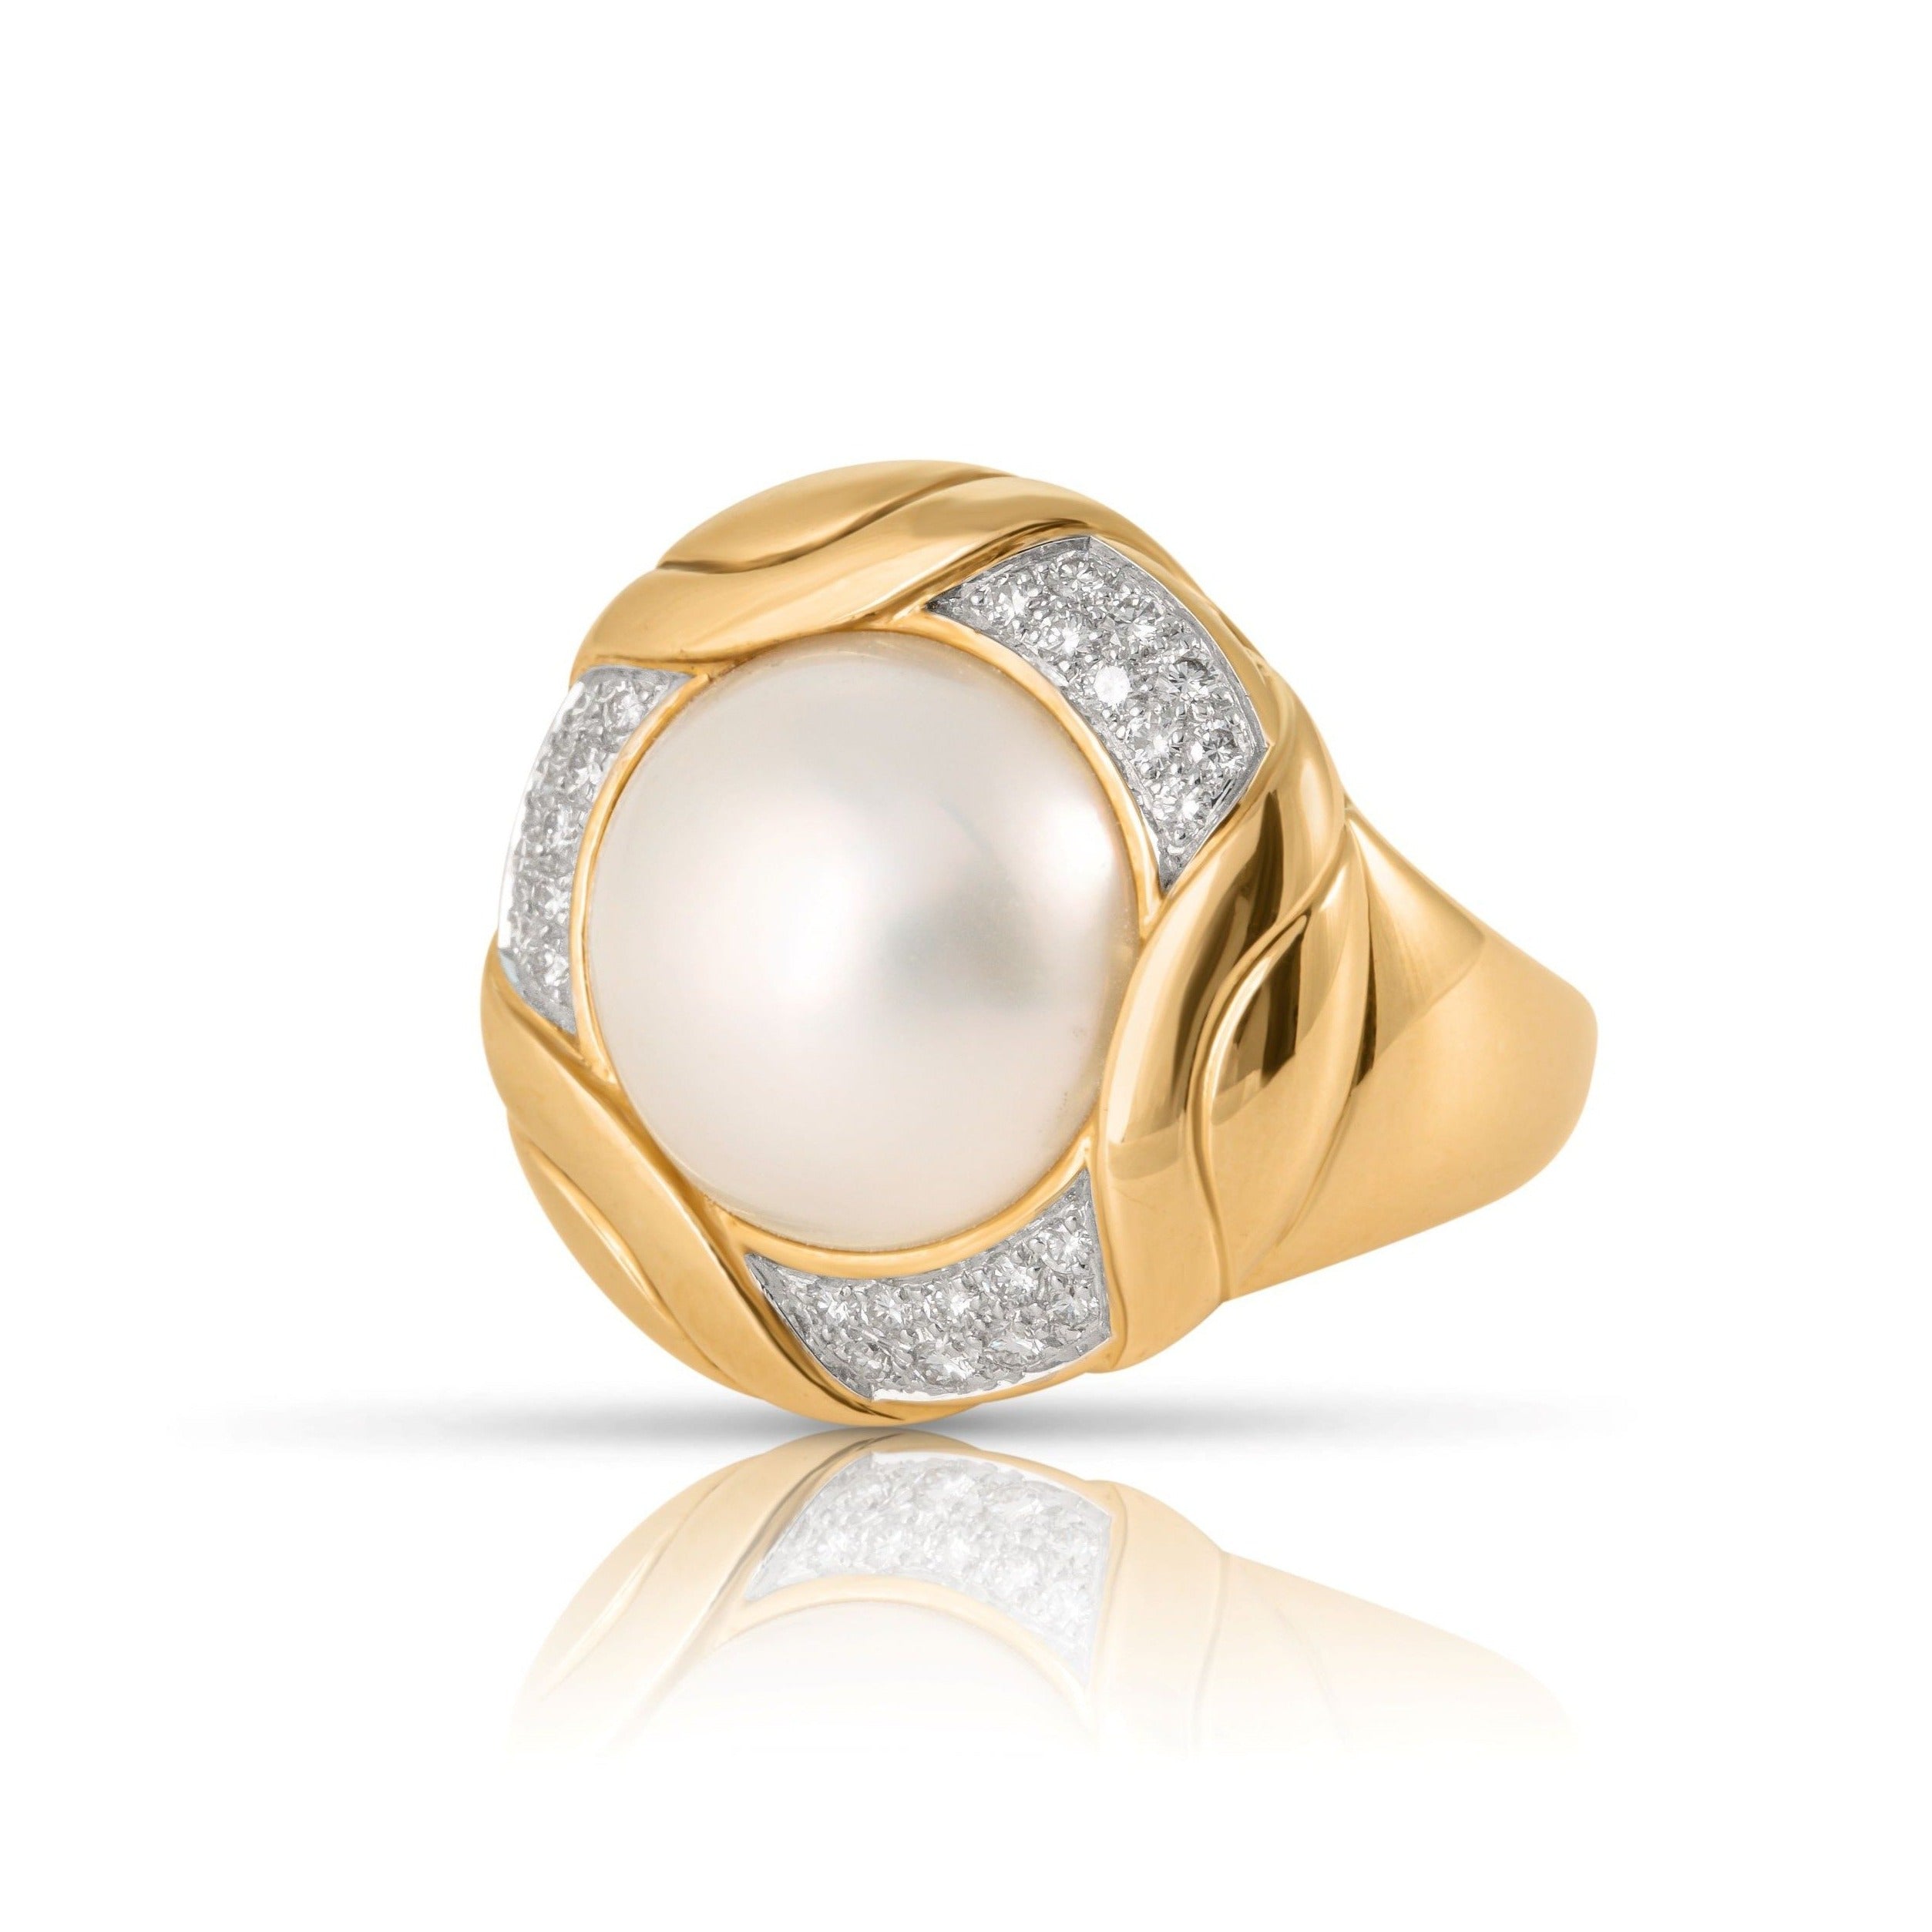 Vintage gold pearl ring with mabé cultured pearl and diamonds.